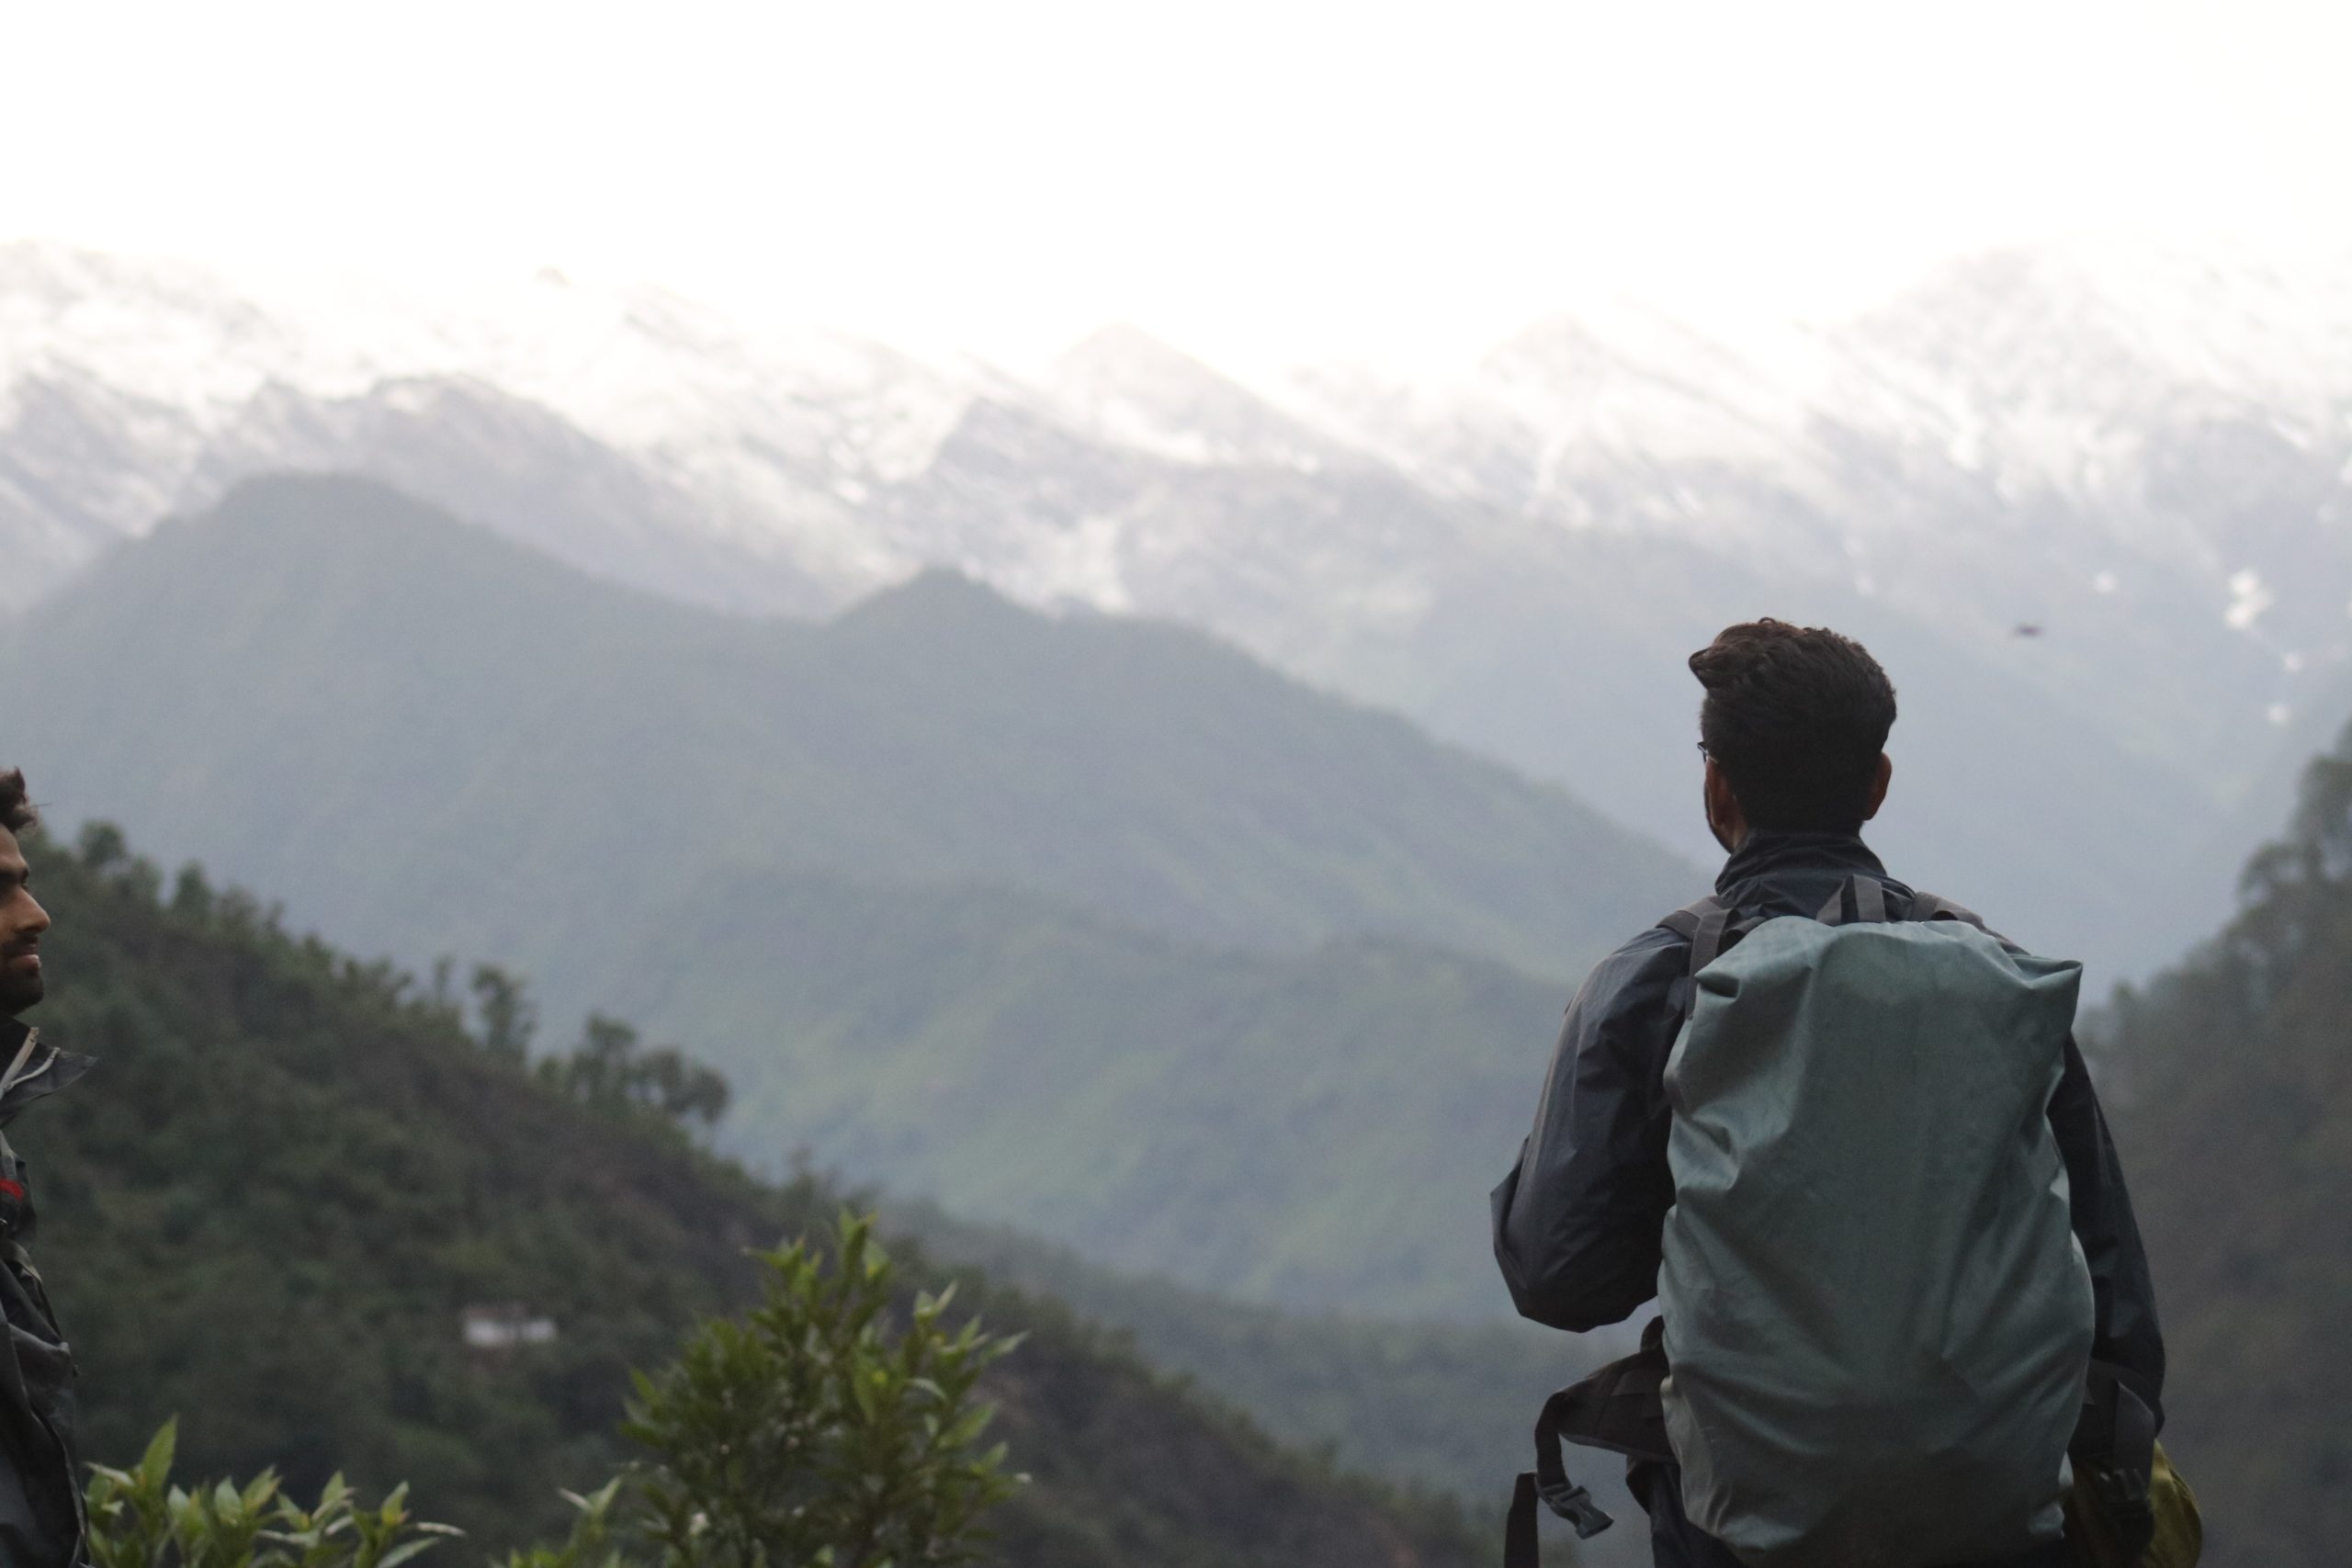 A man with a backpack staring at a foggy mountain range.